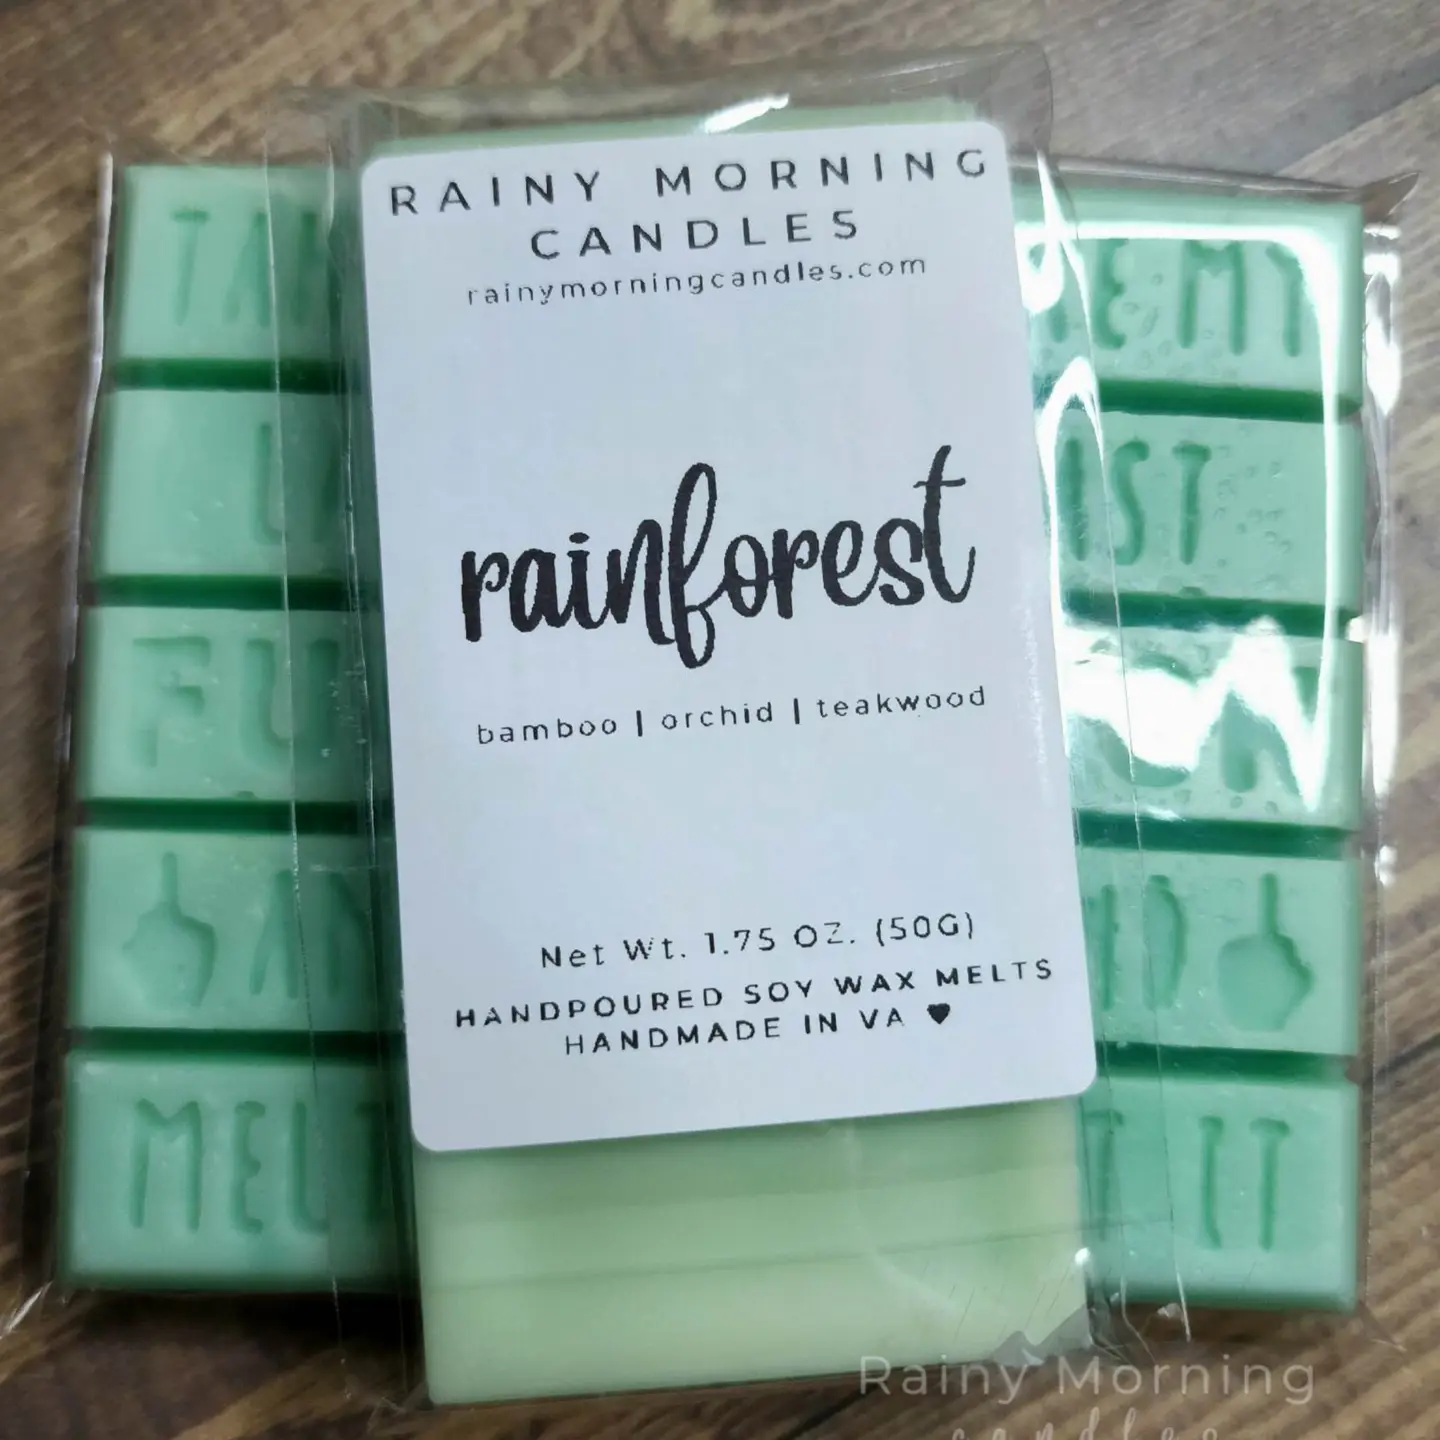 A refreshing blend of floral botanicals and woodsy bottom notes combine to make this unique, resort-worthy scent. Fresh, exotic, and swe **THESE DO CONTAIN CURSE WORDS ON THE FRONT** Rainy Morning Candles wax melts are made with a premium soy blend wax to ensure they're long-lasting and give a great hot throw. Our wax melts are made in small batches, so the color may vary slightly from batch to batch, but the fragrance will always be the same.